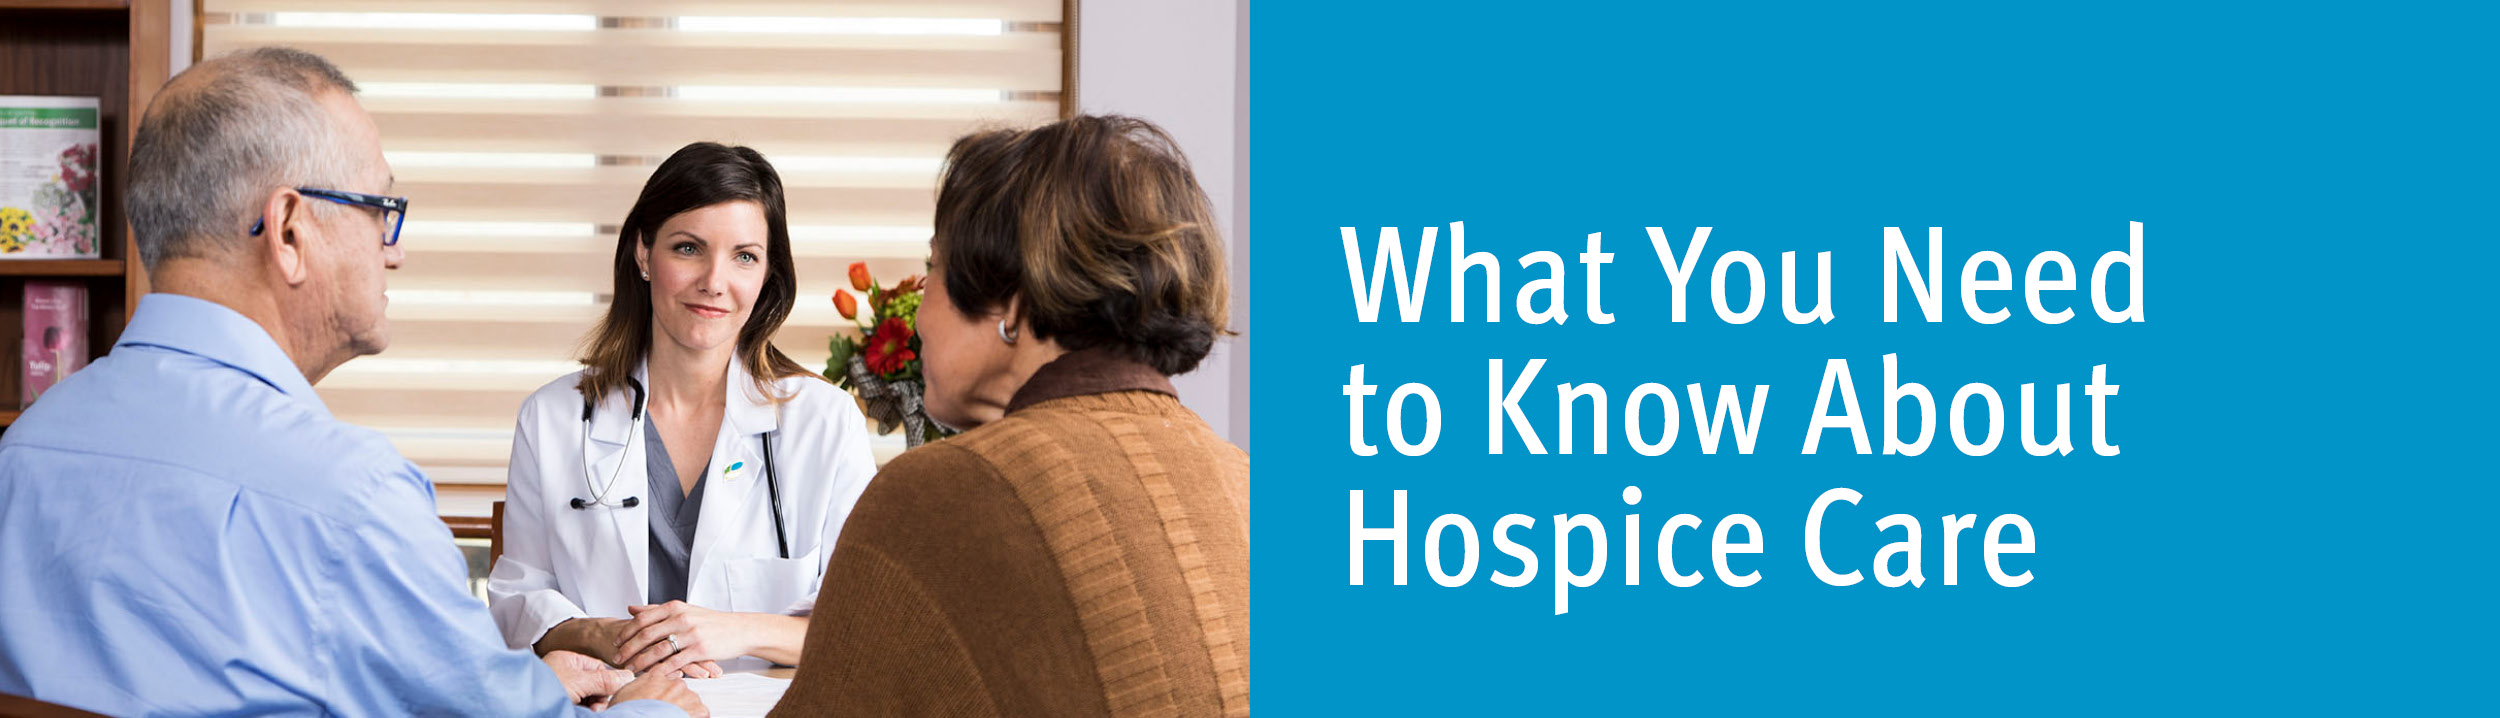 What you need to know about hospice care.